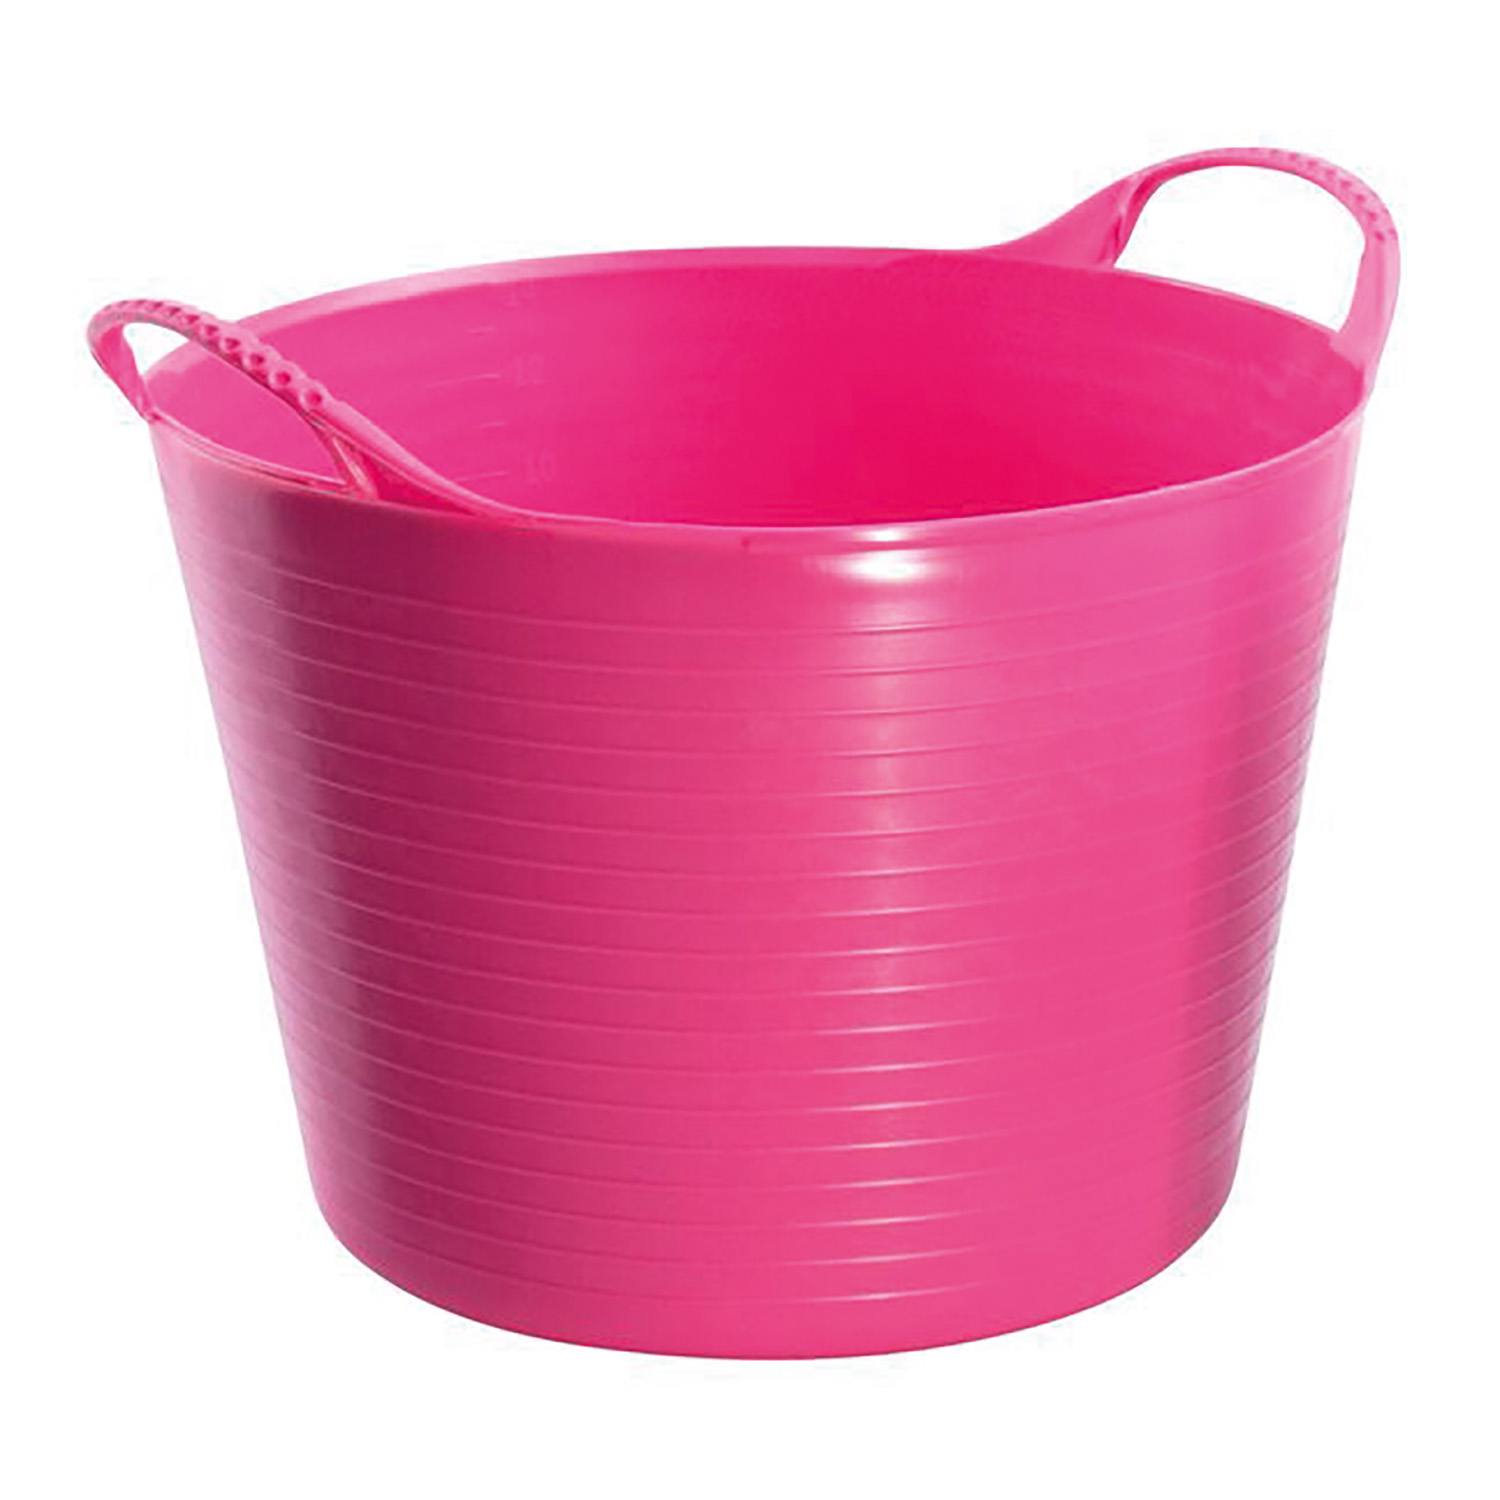 RED GORILLA TUBTRUG FLEXIBLE SMALL PINK SMALL (14LT)